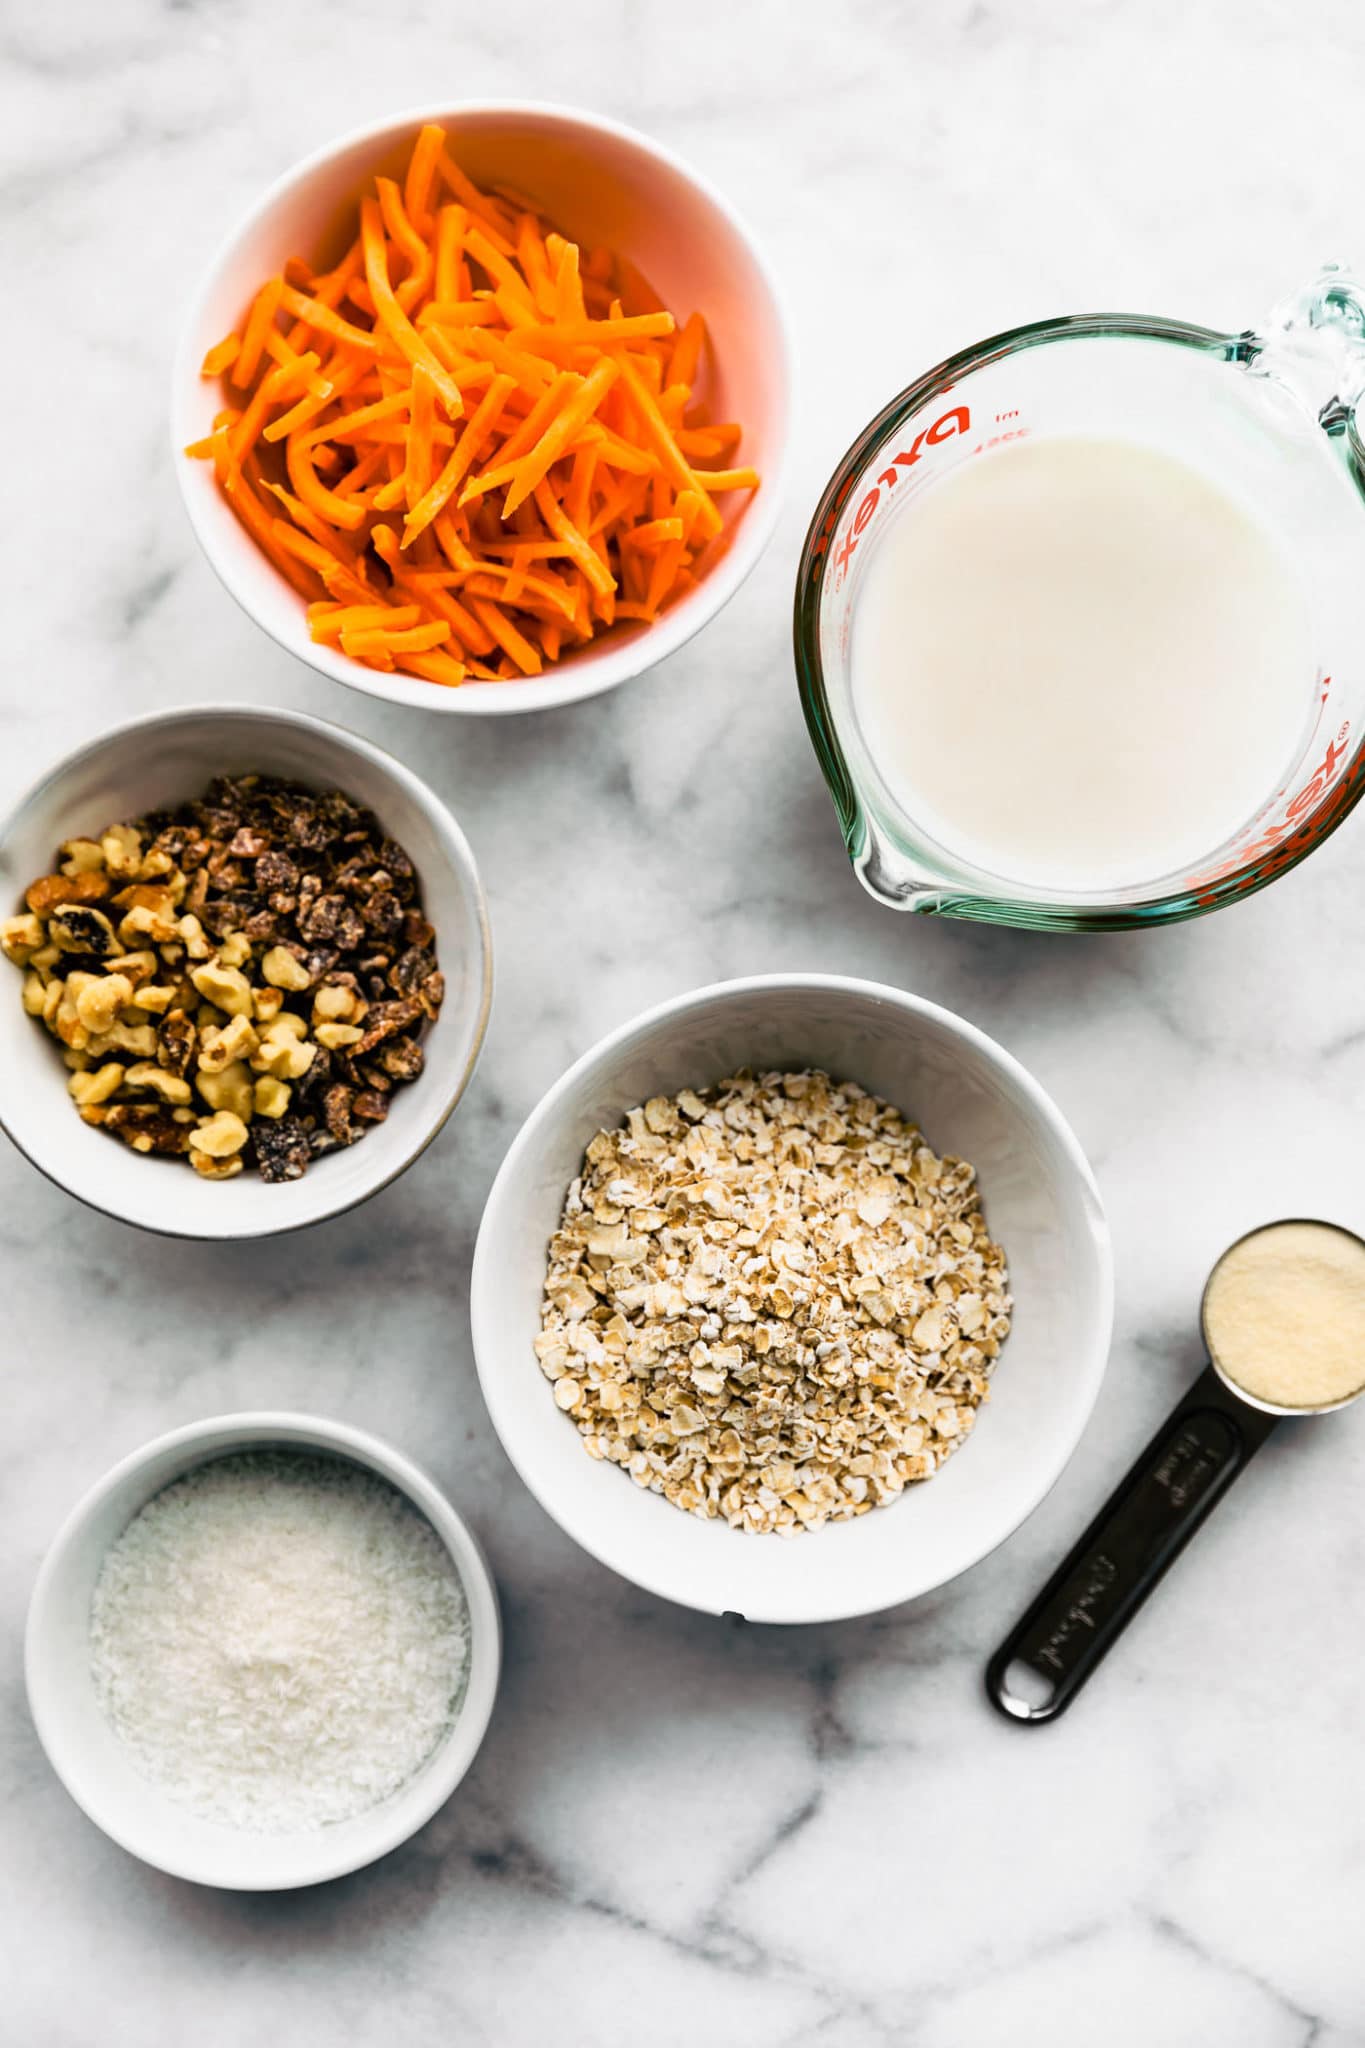 bowls of ingredients containing items for healthy carrot cake muffins including shredded carrots, chopped walnuts, raisins, gluten free oats, dairy-free milk, and sugar